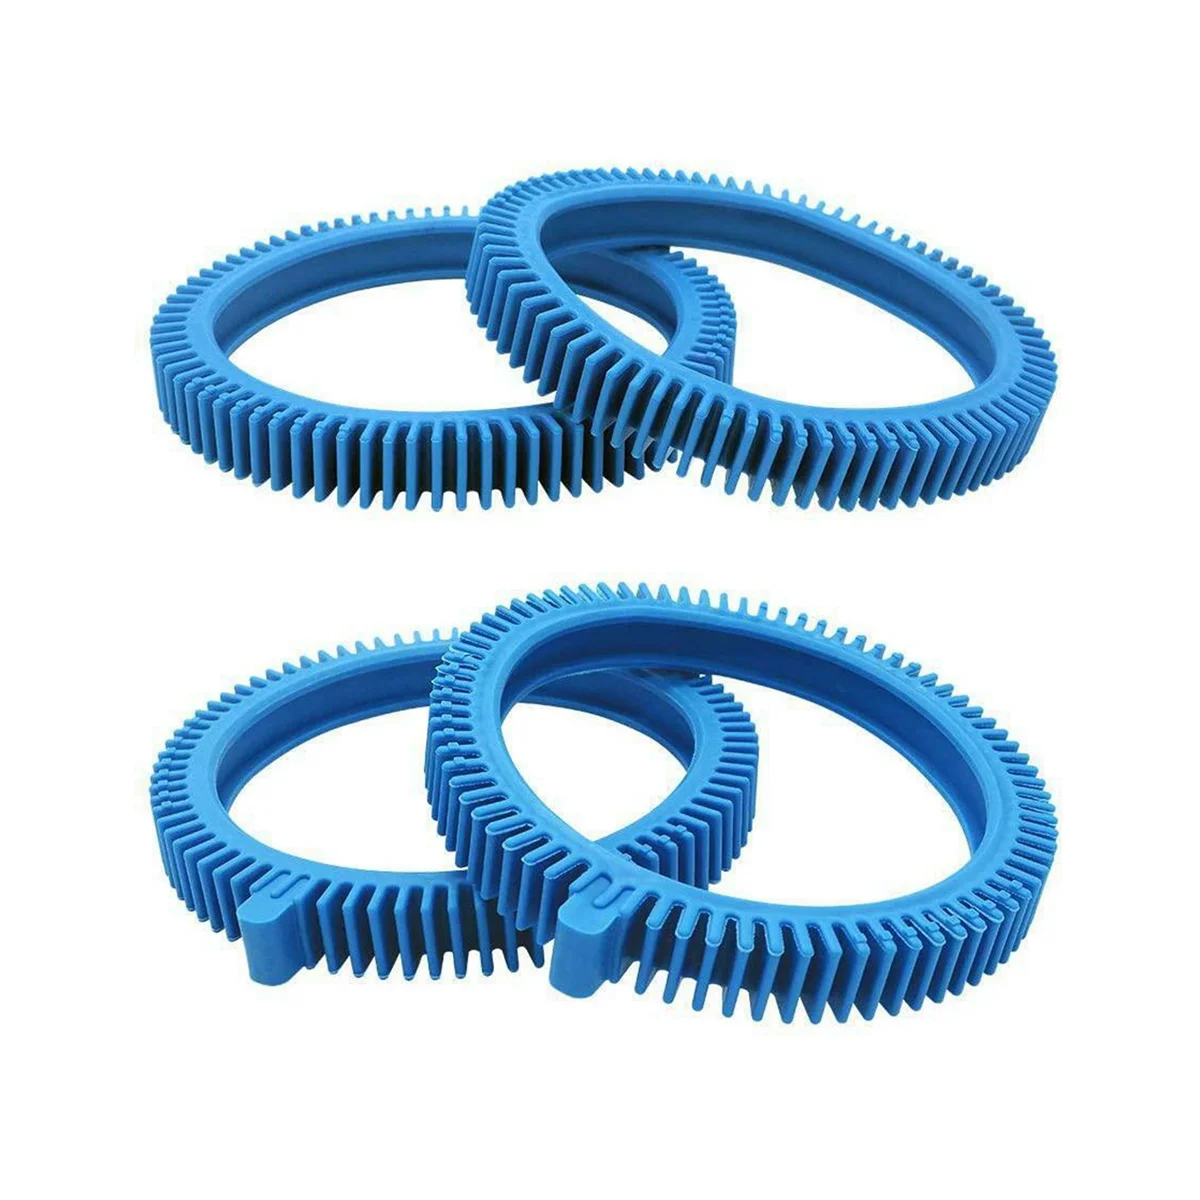 

896584000-143 Pool Cleaner Front Tire Kit with Super Hump By Seentech-for Poolvergnuegen and Hayward Phoenix Cleaners